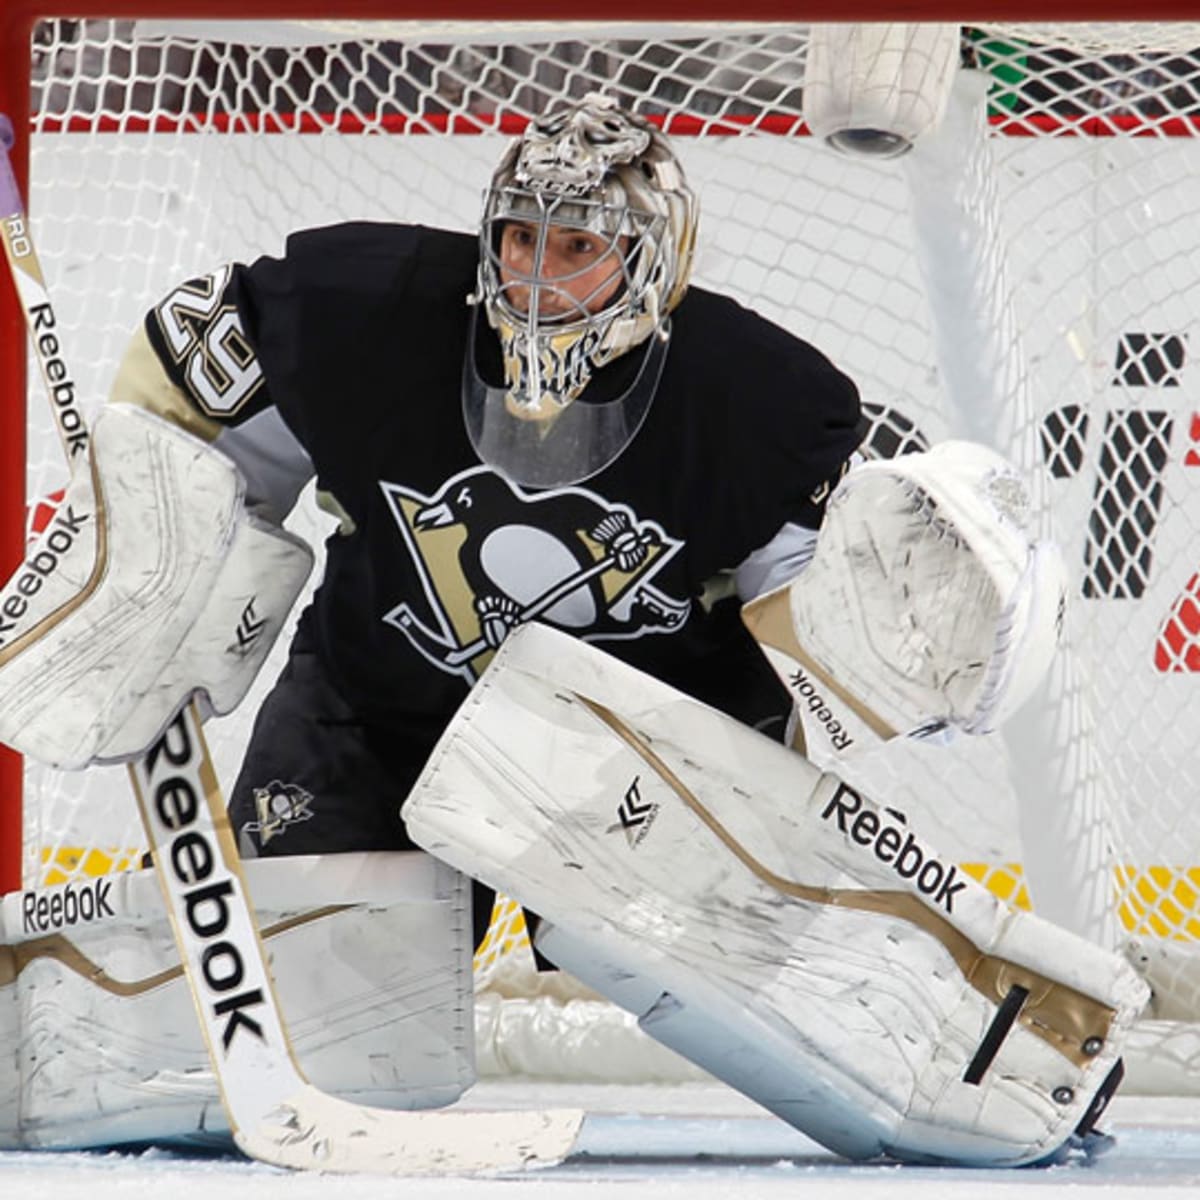 Source: Penguins not interested in reacquiring goalie Marc-Andre